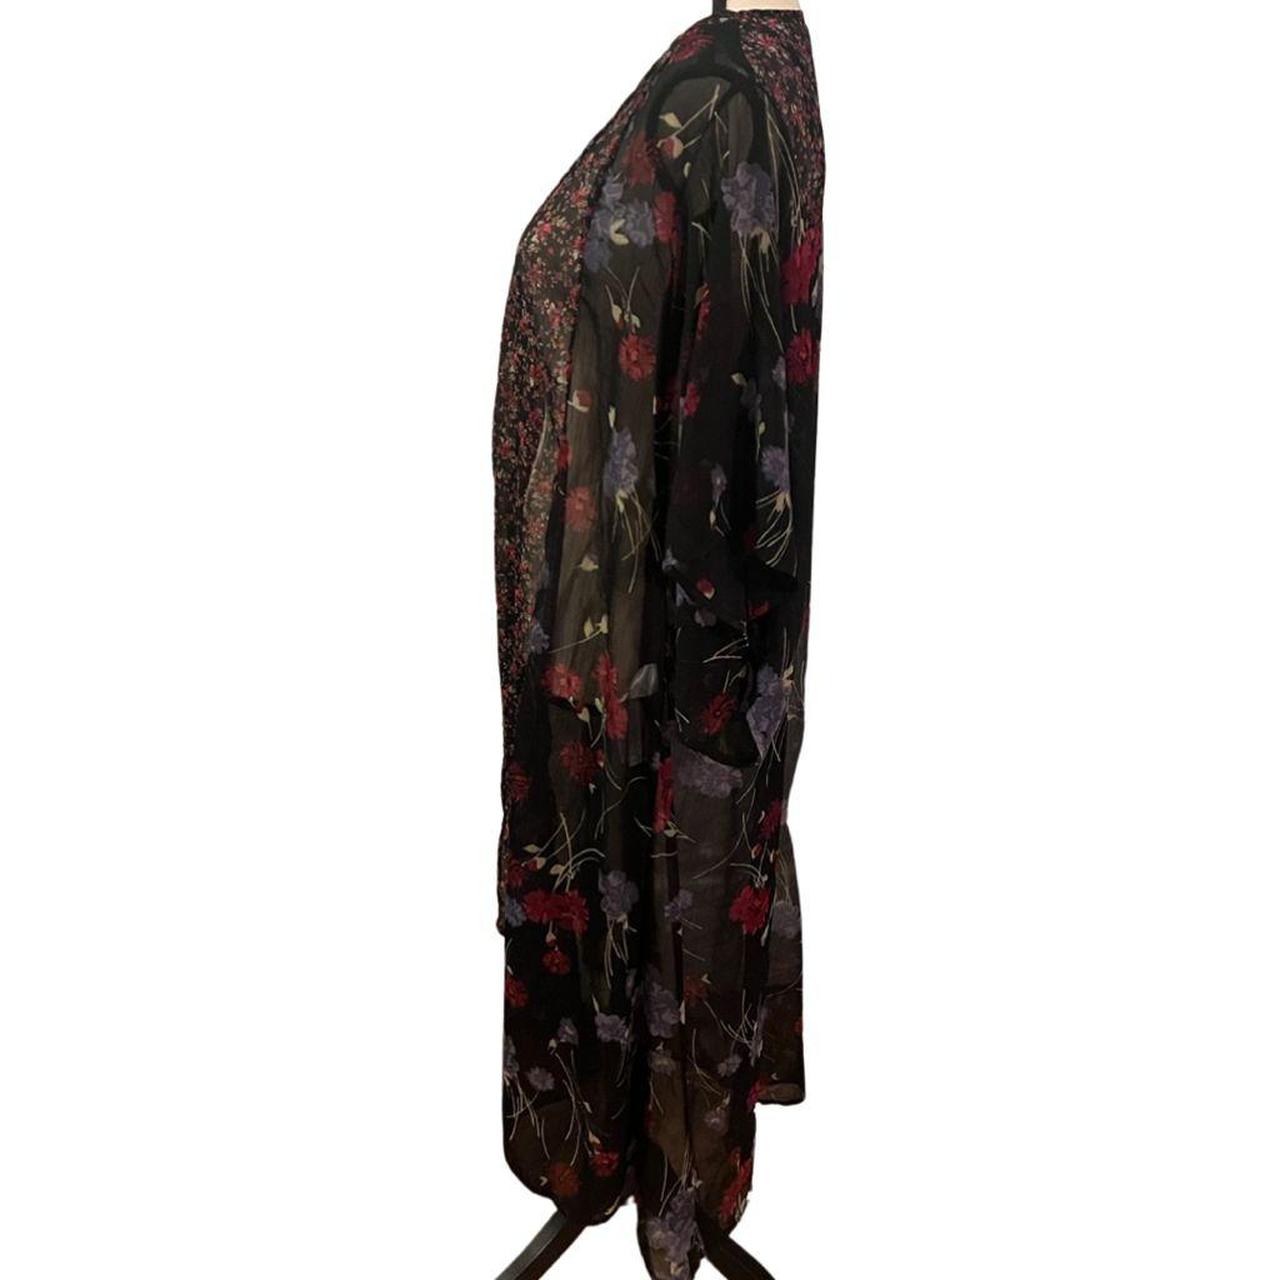 Band of Gypsies Black/Red Floral Kimono/Duster Sz S... - Depop